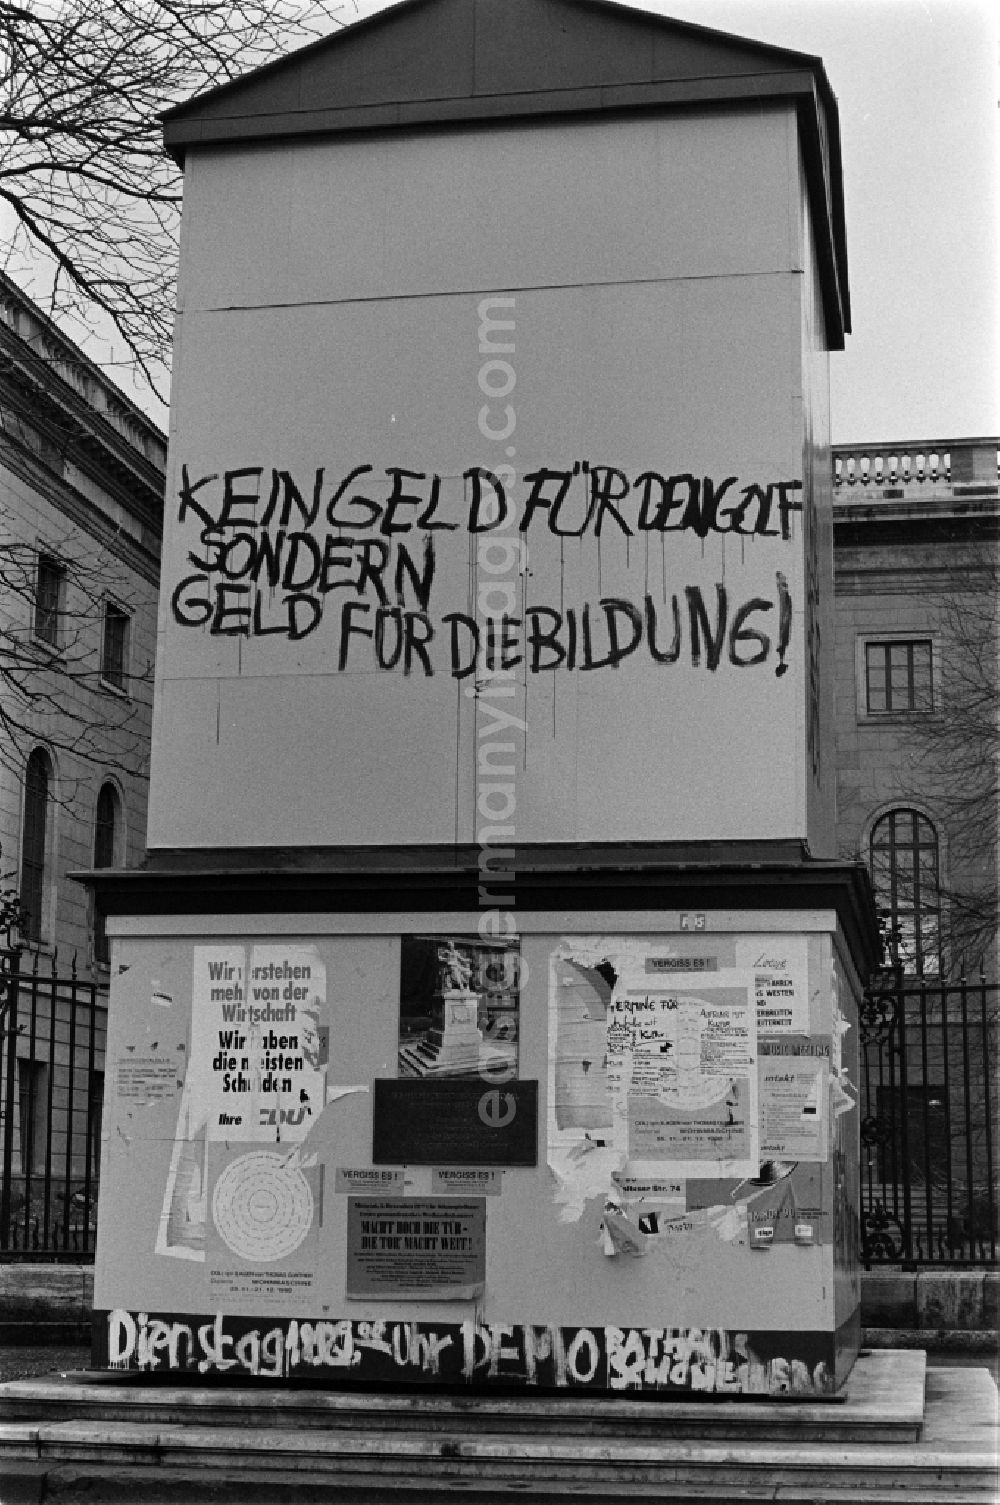 Berlin: The words No money for the Golf, but money for education stands at the winter enclosure of the Humboldt Monument during the protest against the transaction of the Humboldt University in Berlin - Mitte, the former capital of the GDR, German Democratic Republic